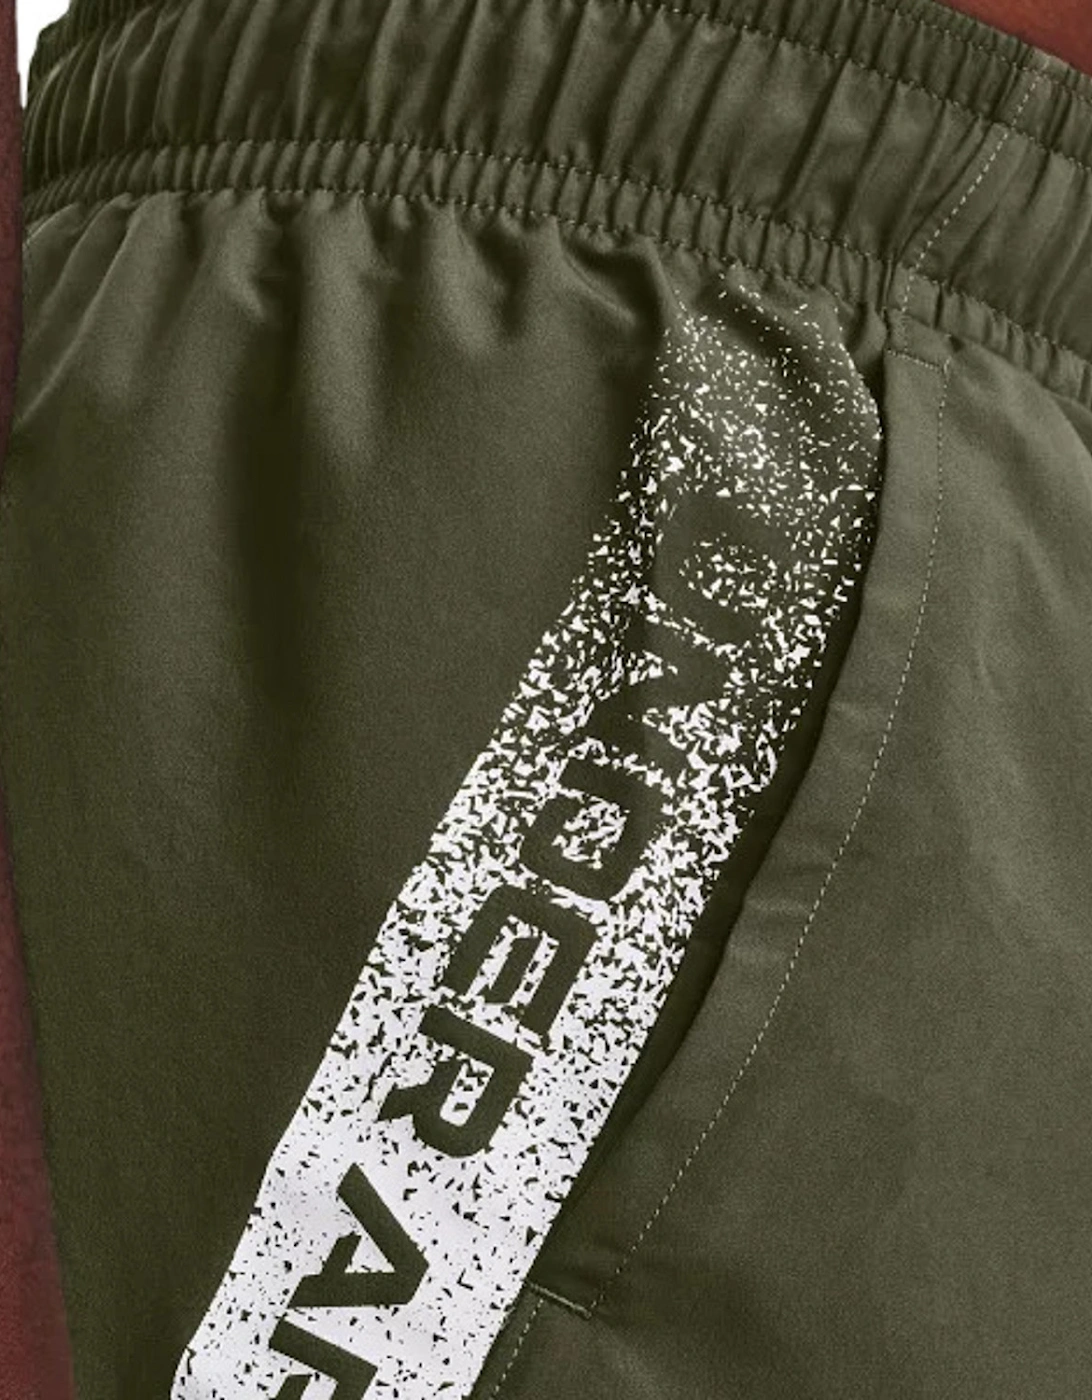 Mens Woven Graphic Shorts (Olive)